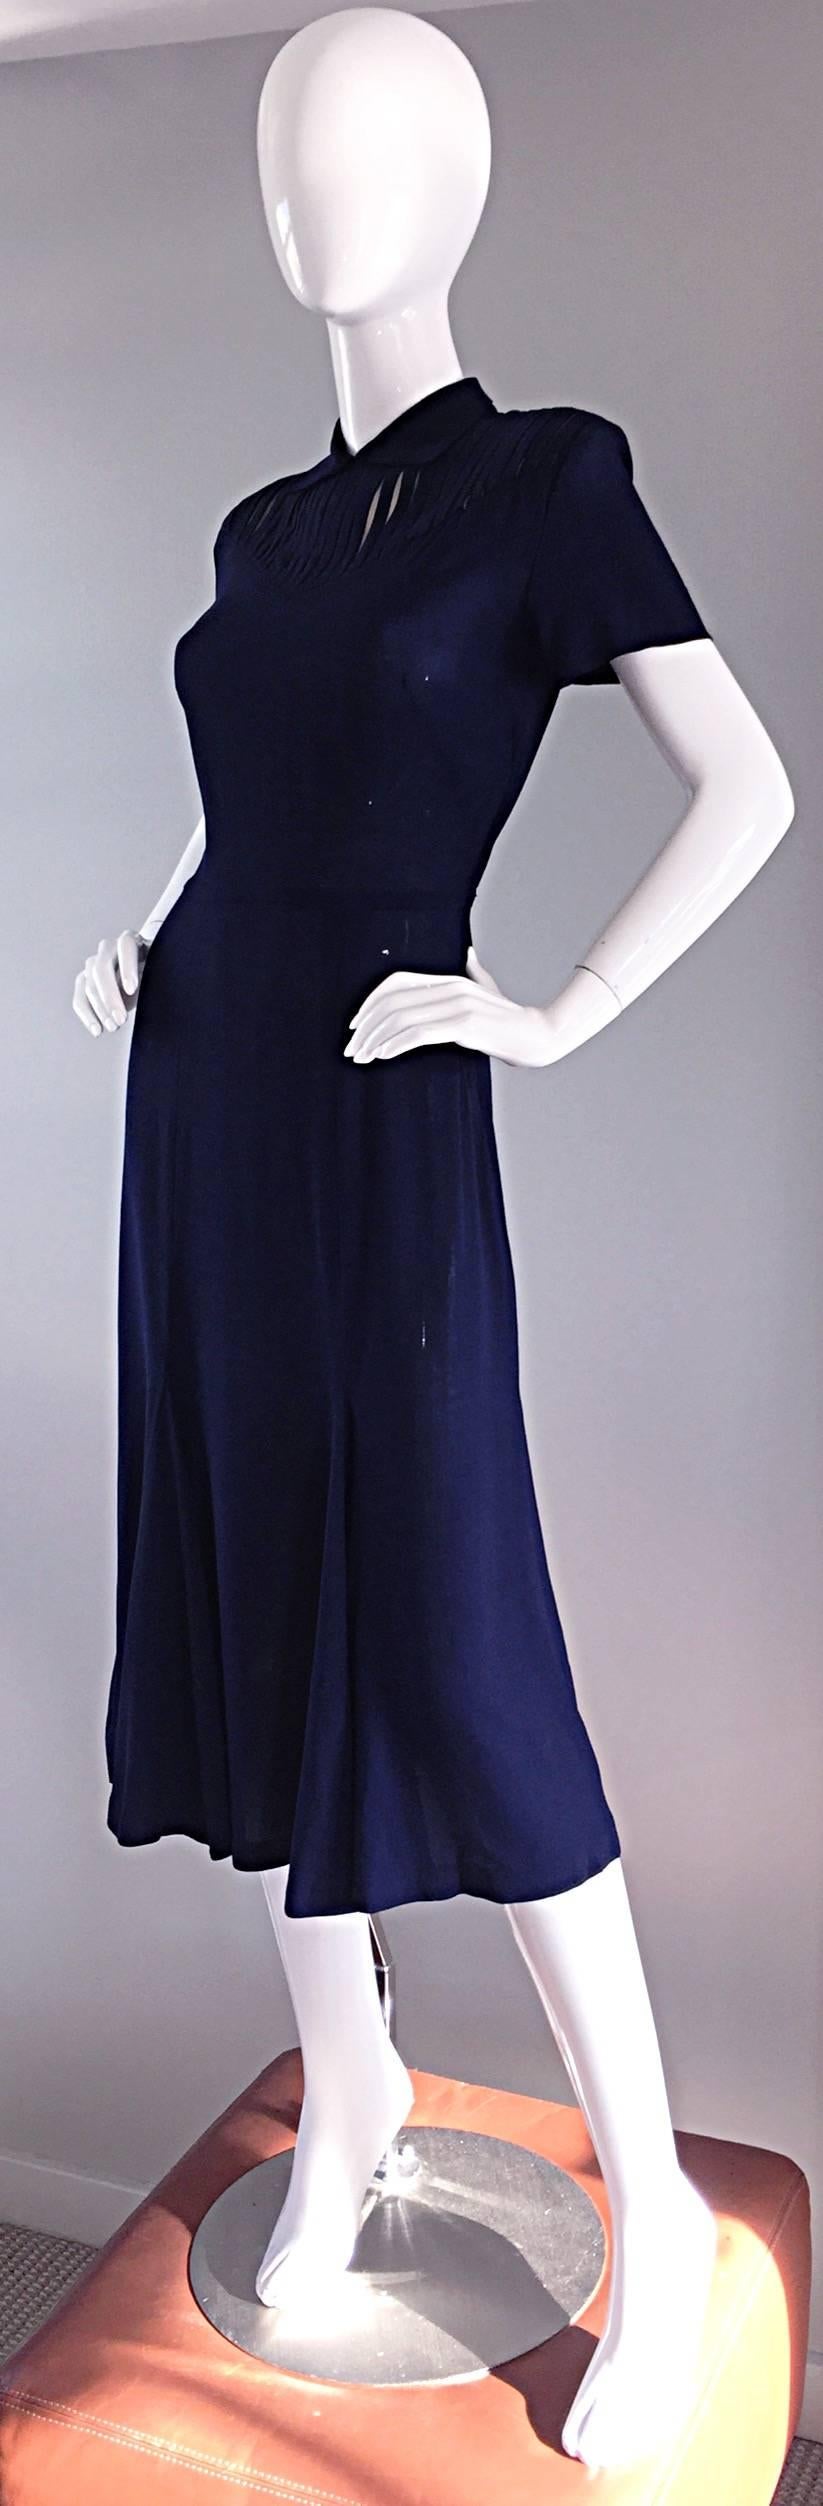 Black Chic 1940s 40s Navy Blue Crepe + Nude Illusion Vintage Day Dress